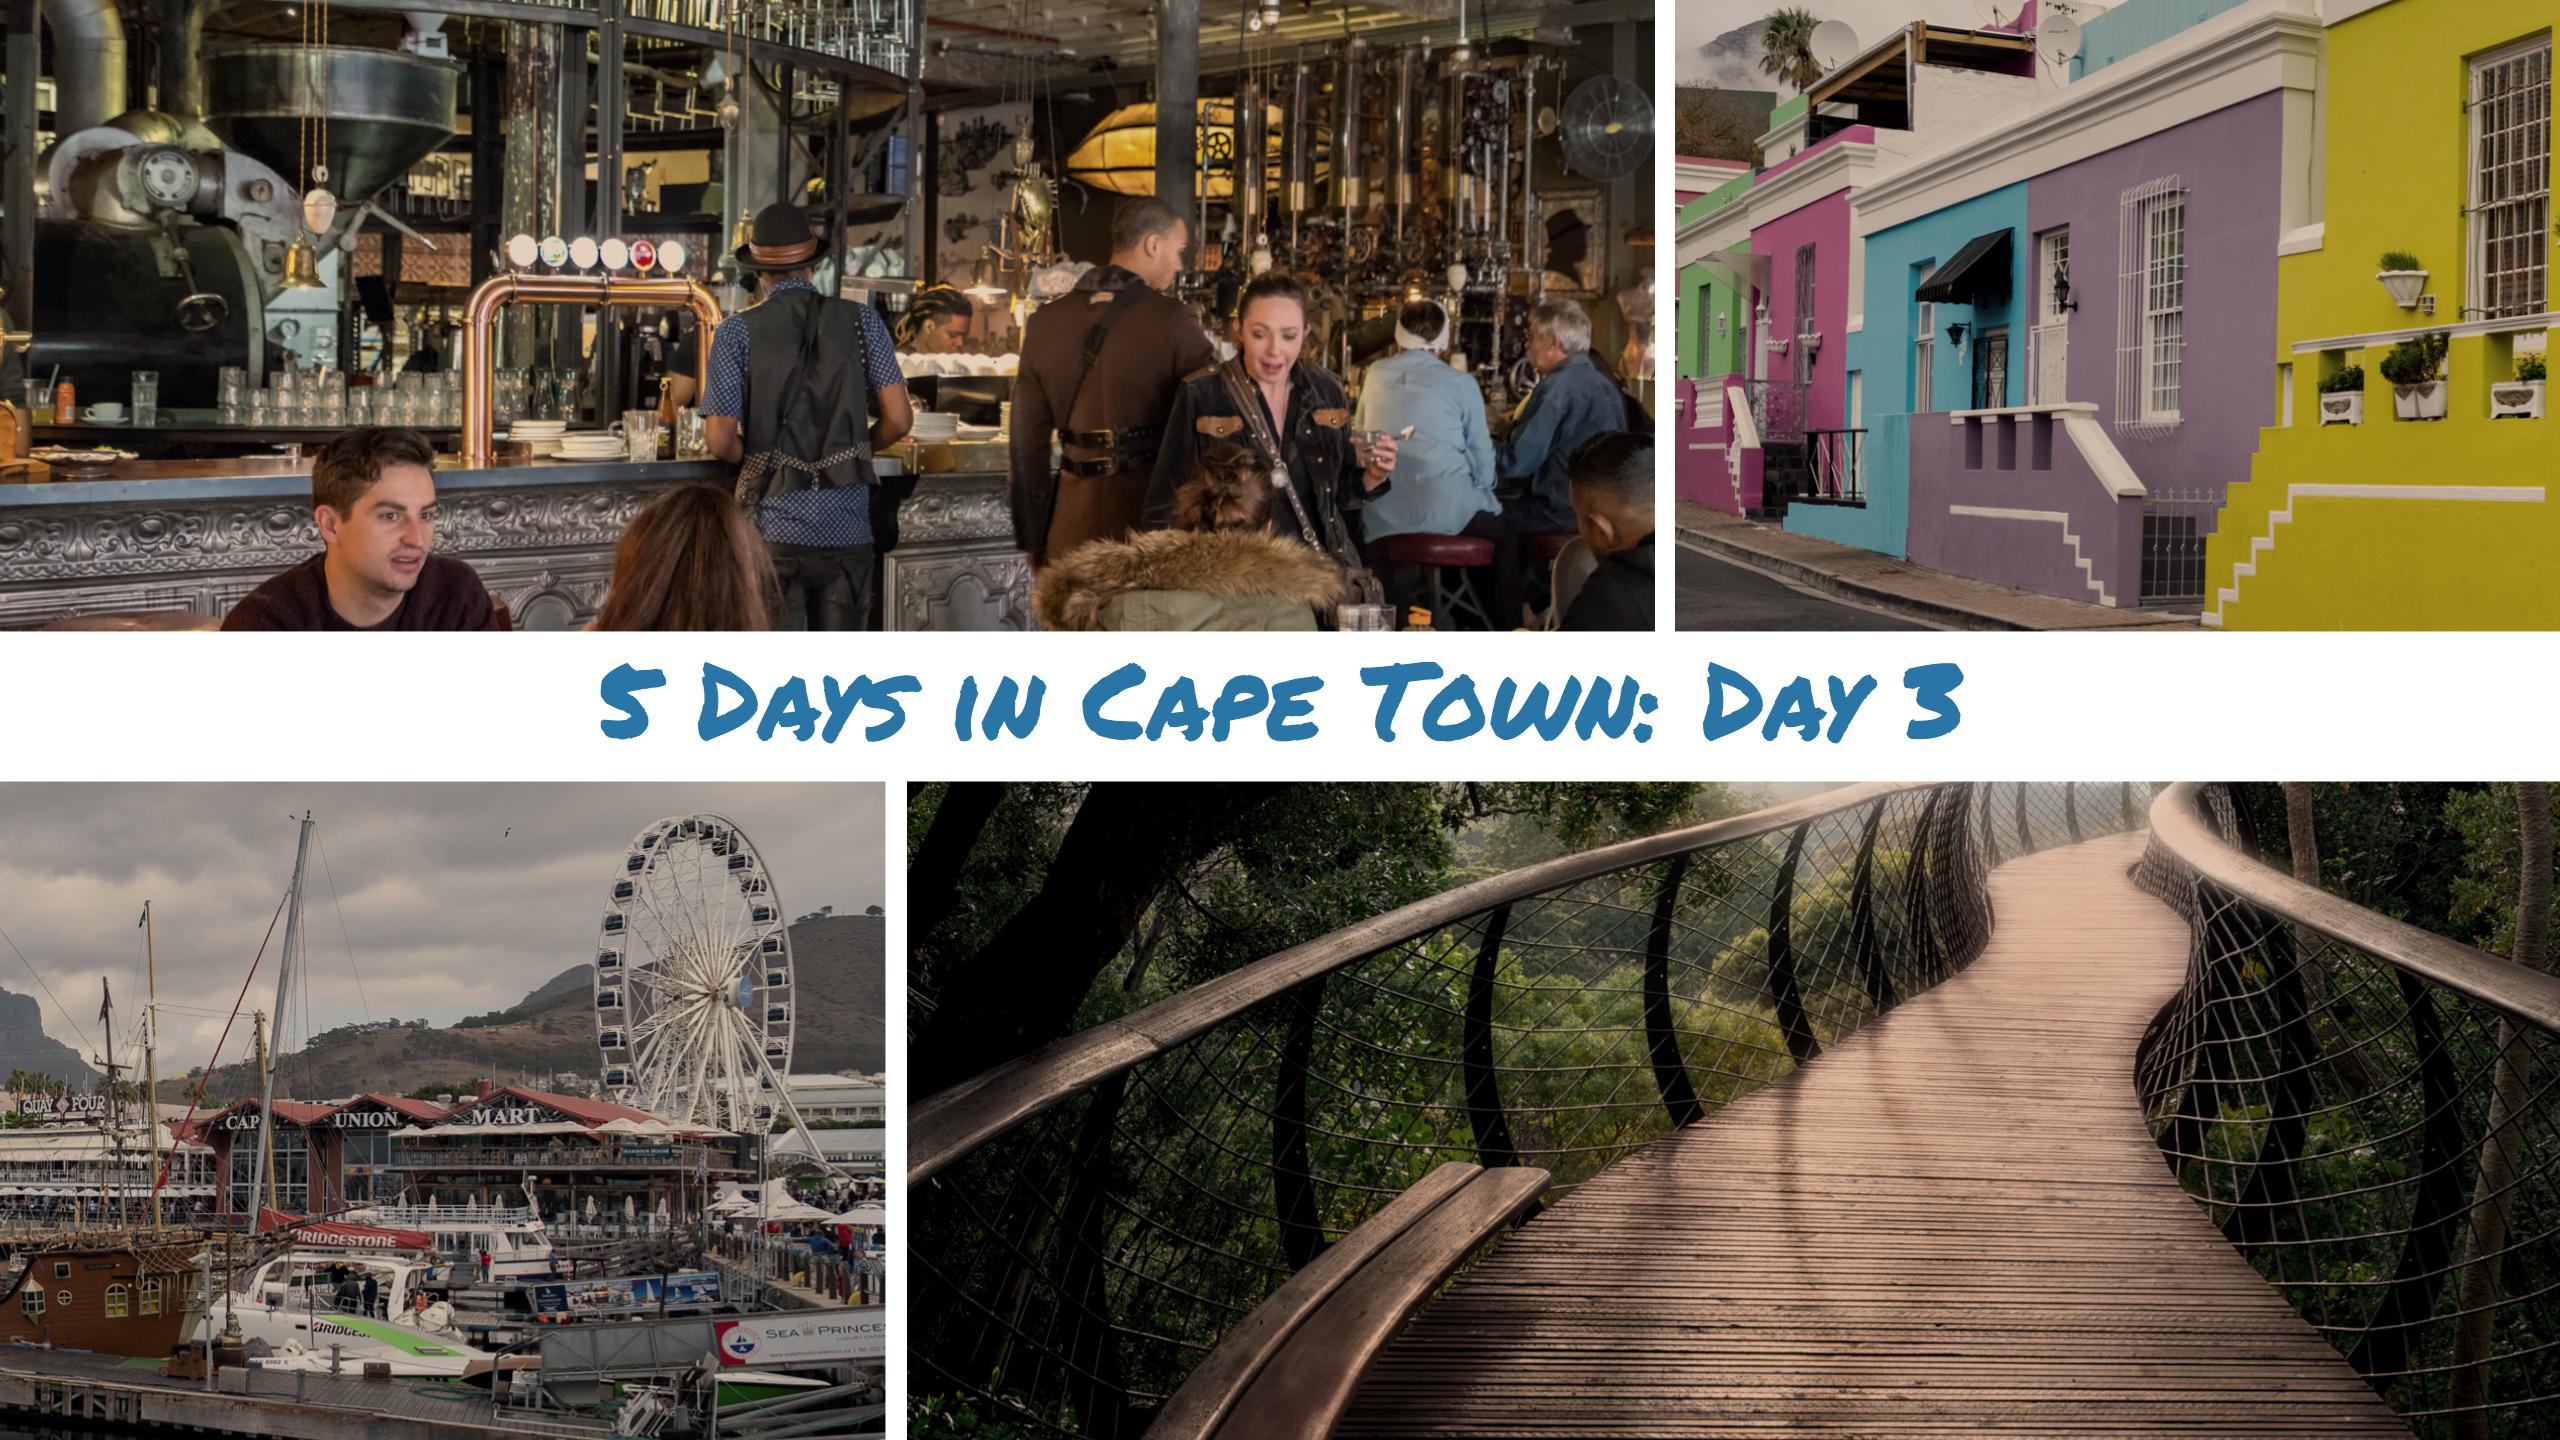 Day 3 in Cape Town itinerary